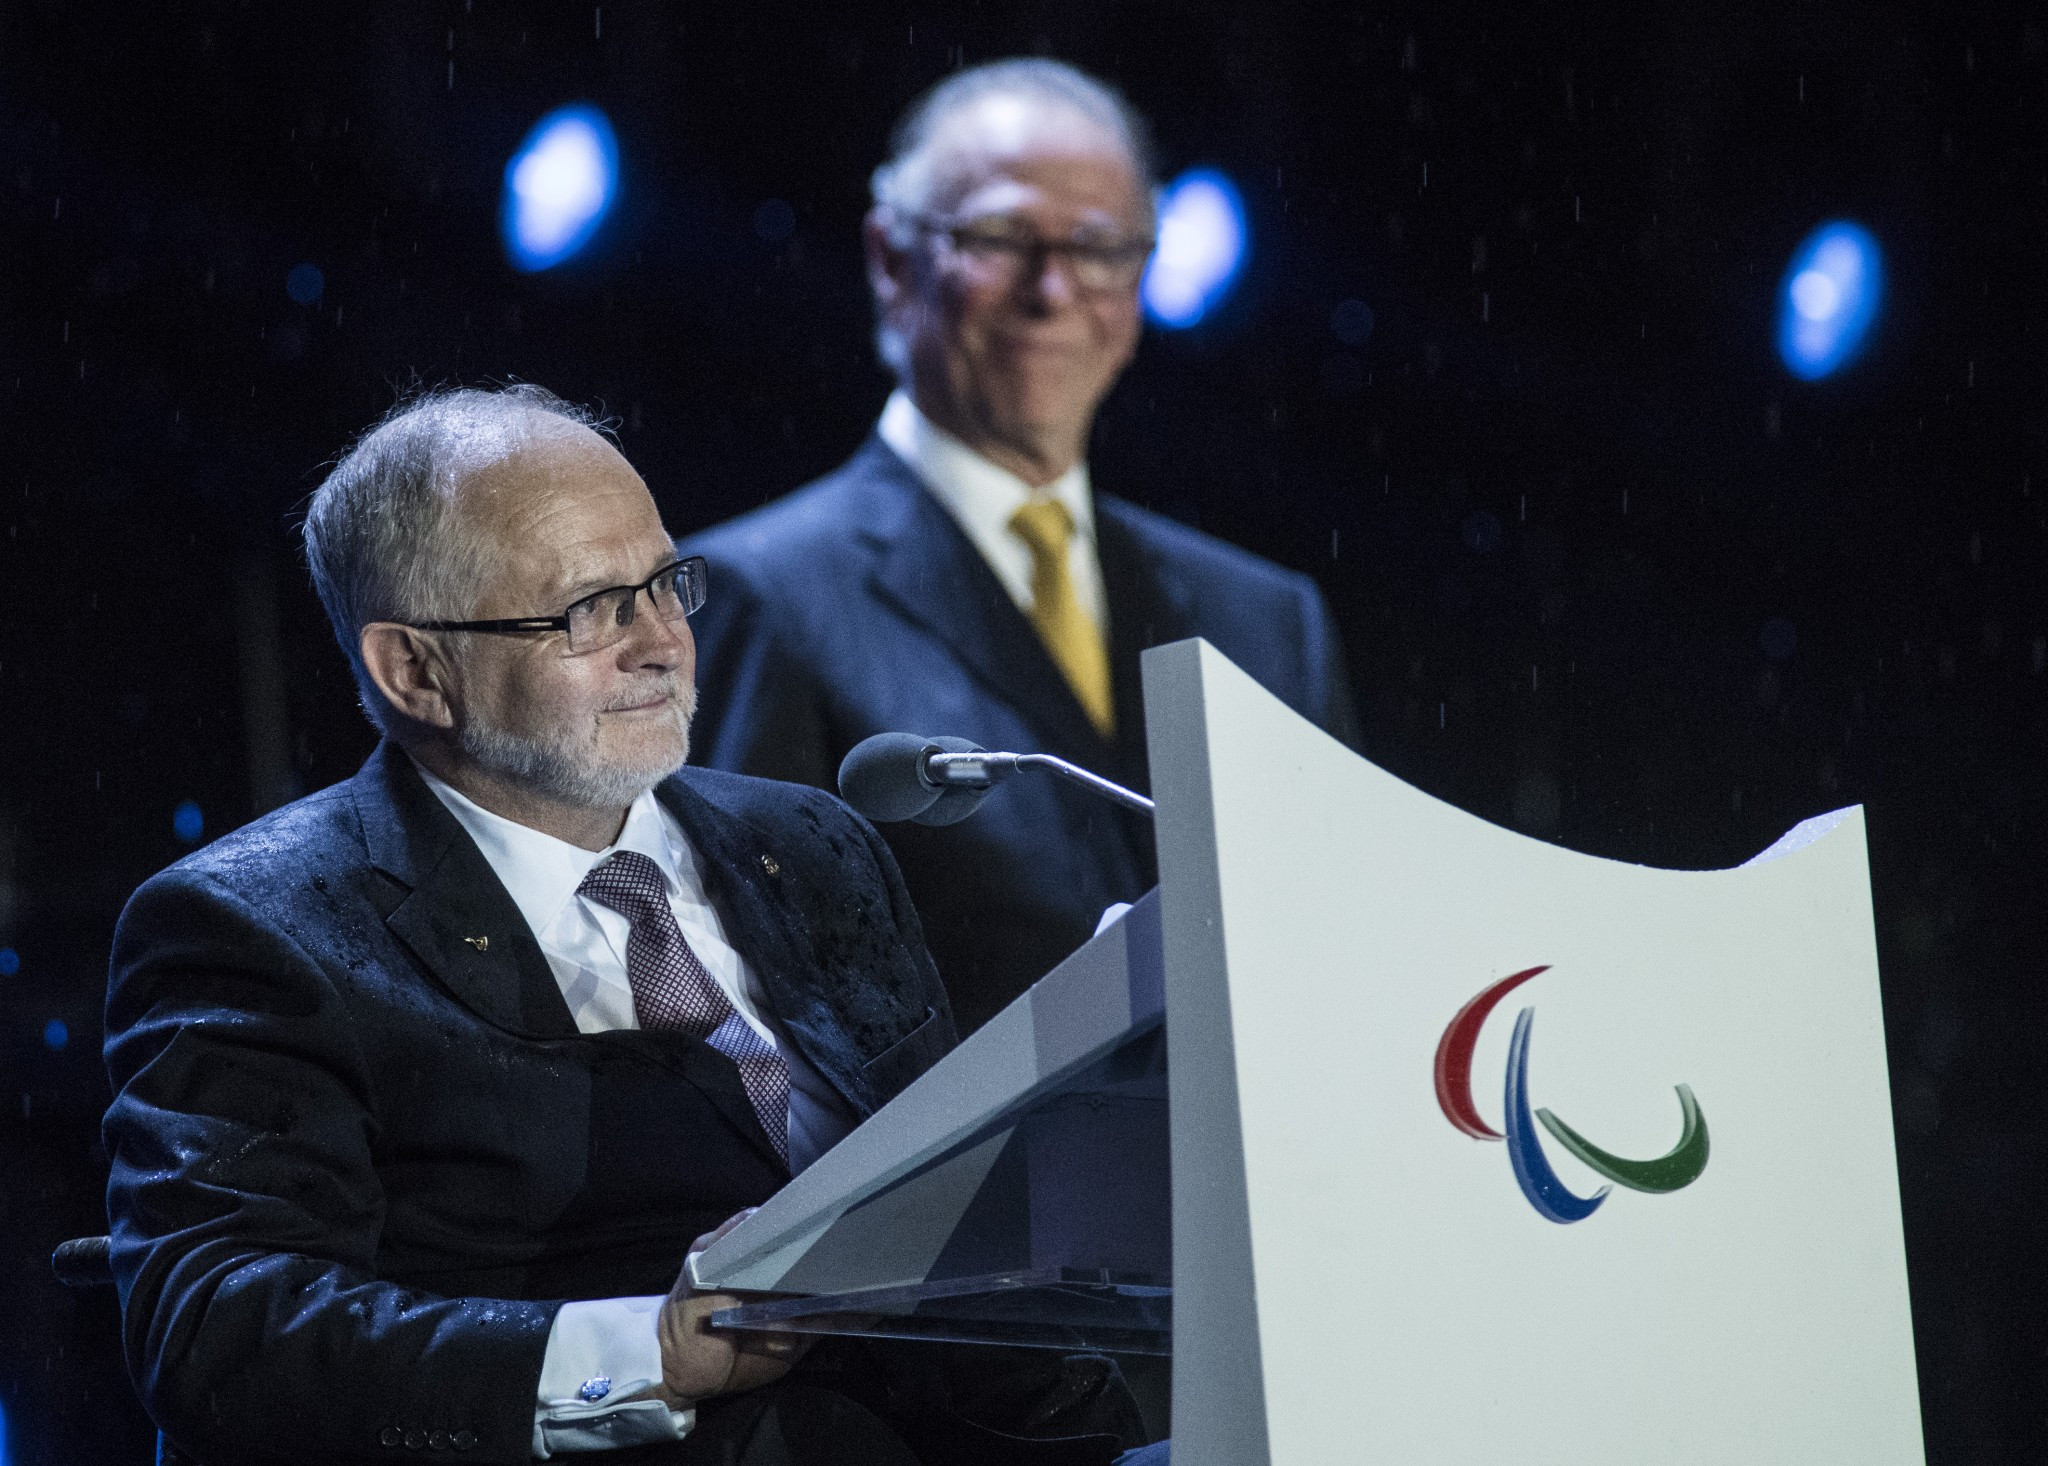 John Petersson is vying to replace Sir Philip Craven as President of the IPC ©Getty Images